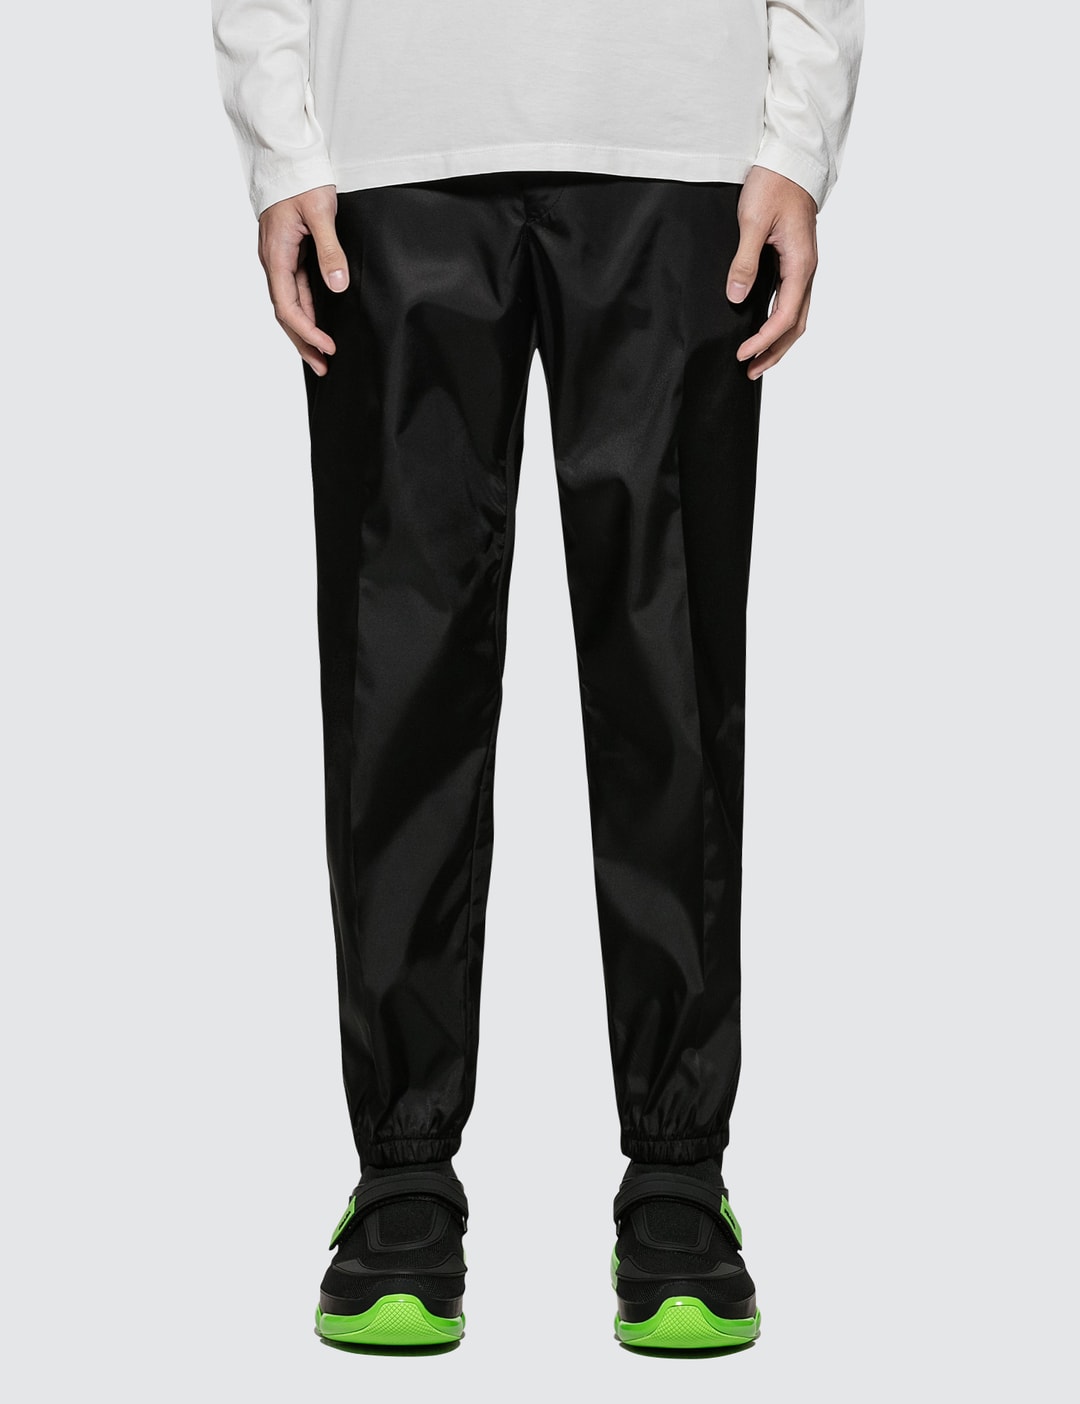 Prada - Nylon Trousers | HBX - Globally Curated Fashion and Lifestyle ...